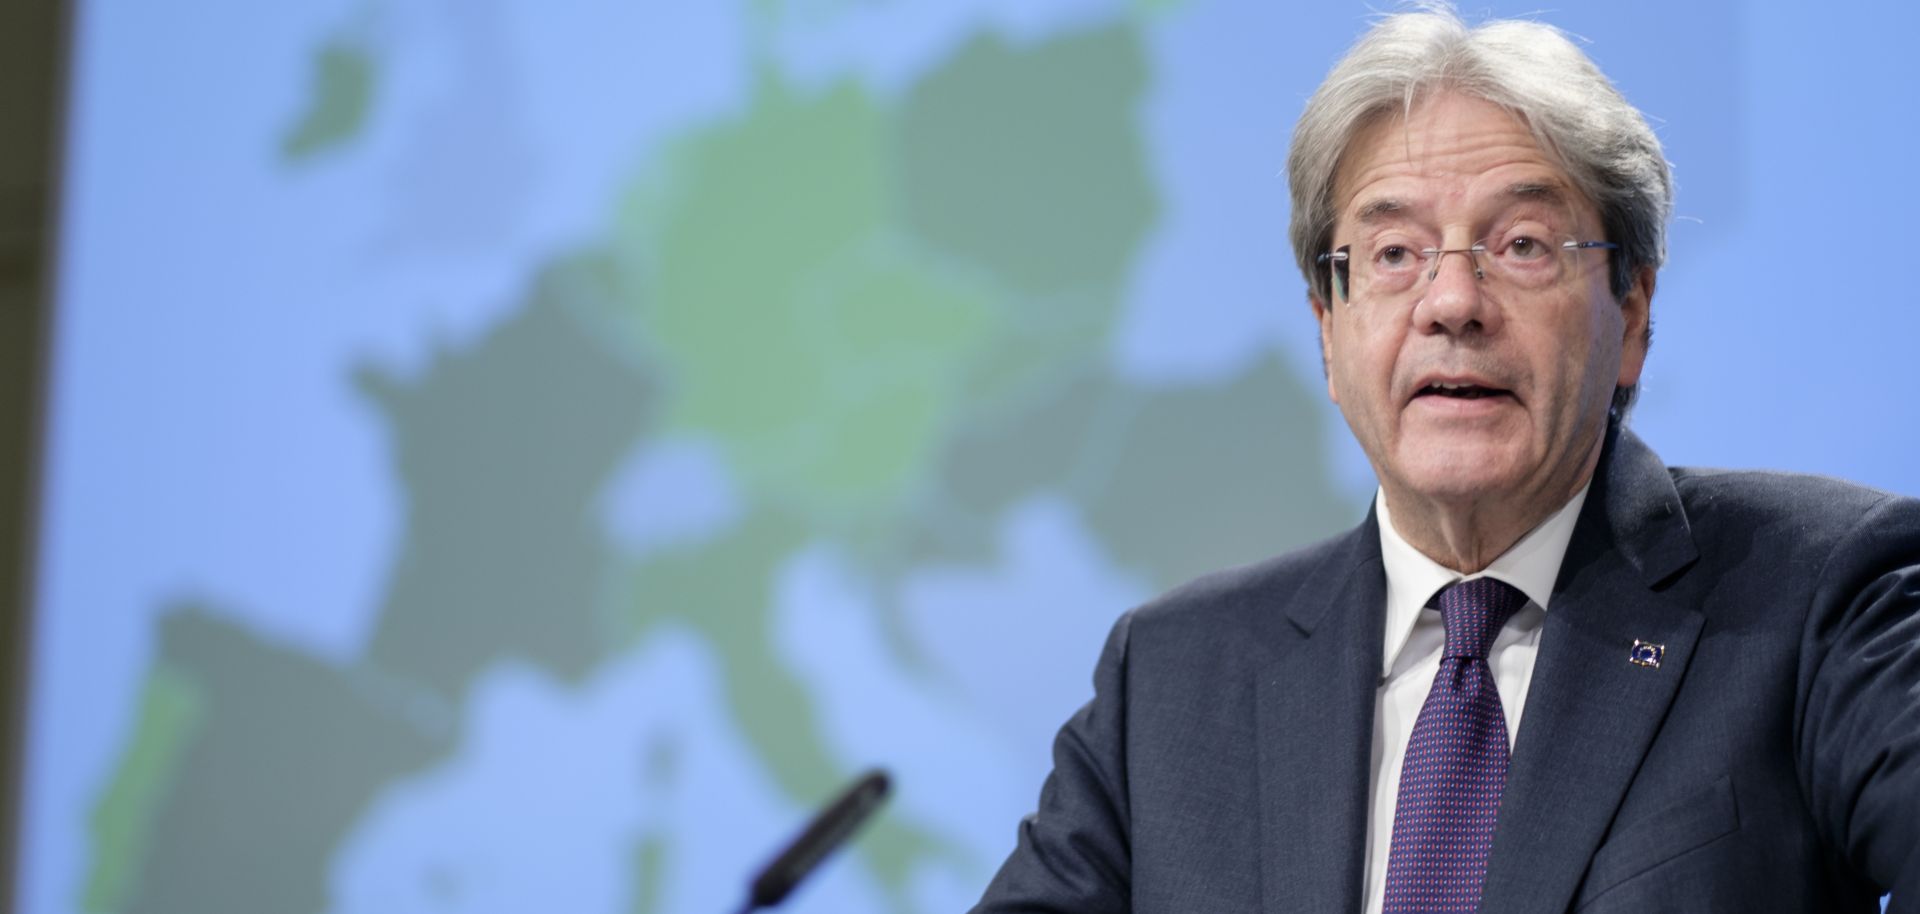 EU Economy Commissioner Paolo Gentiloni presents the bloc’s latest economic forecast in Brussels, Belgium, on May 12, 2021. 